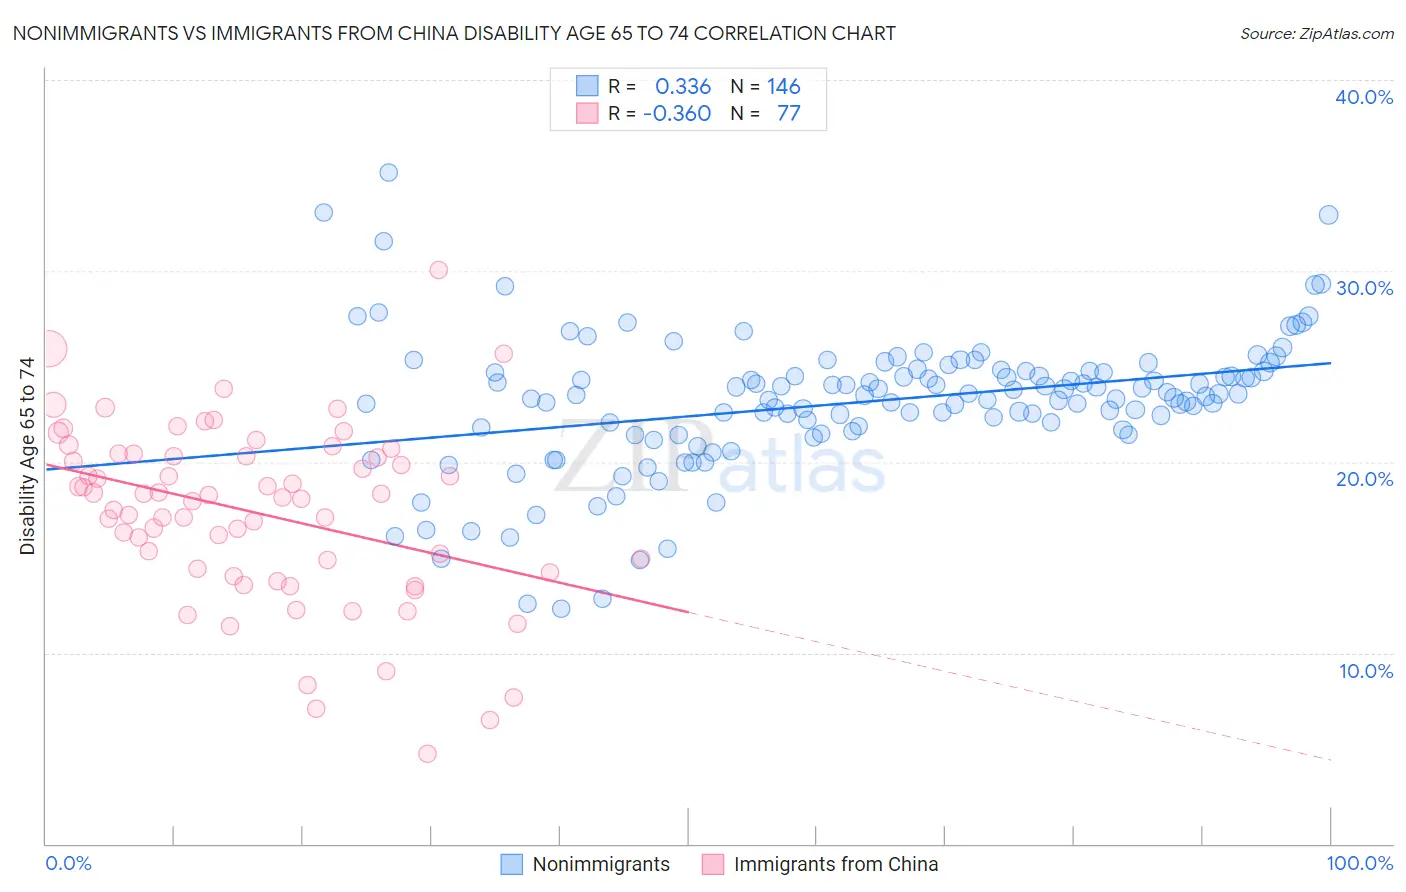 Nonimmigrants vs Immigrants from China Disability Age 65 to 74